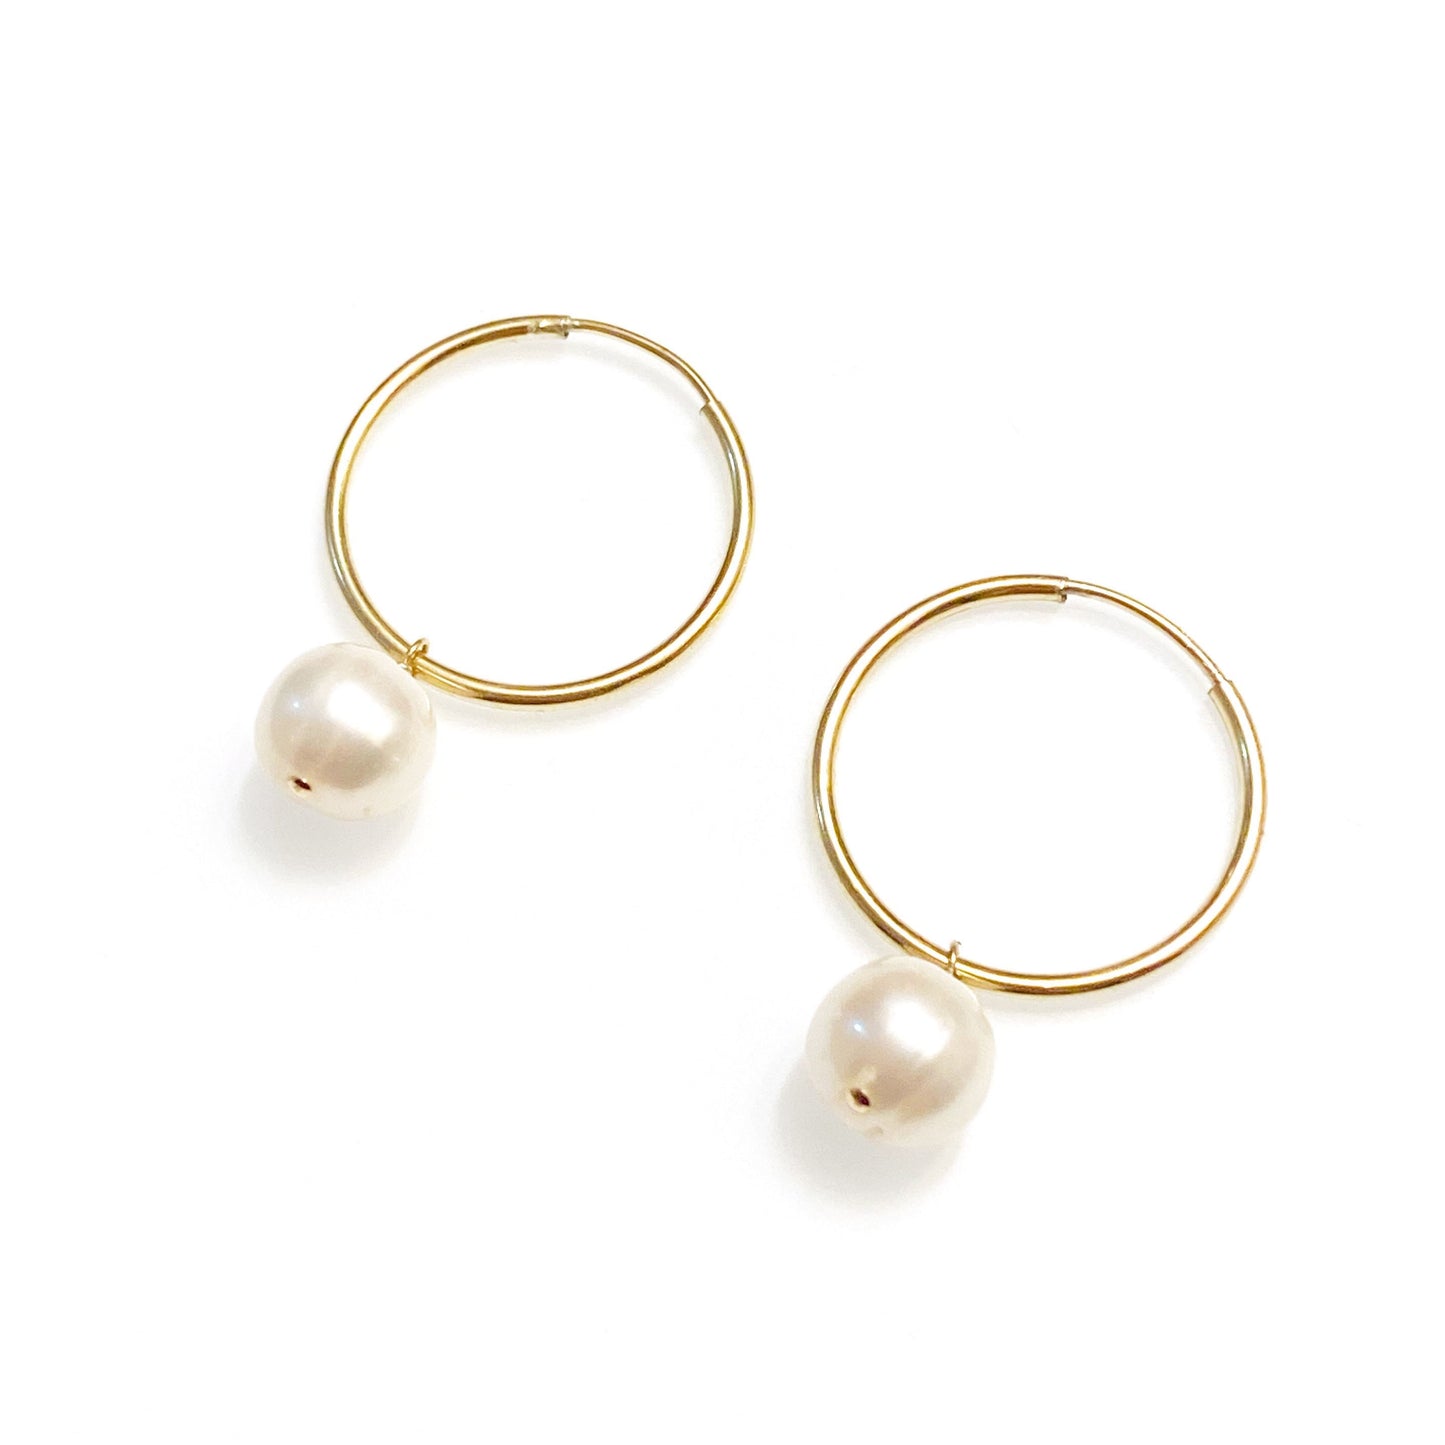 Mini pearl hoops (14K gold-filled or sterling silver)